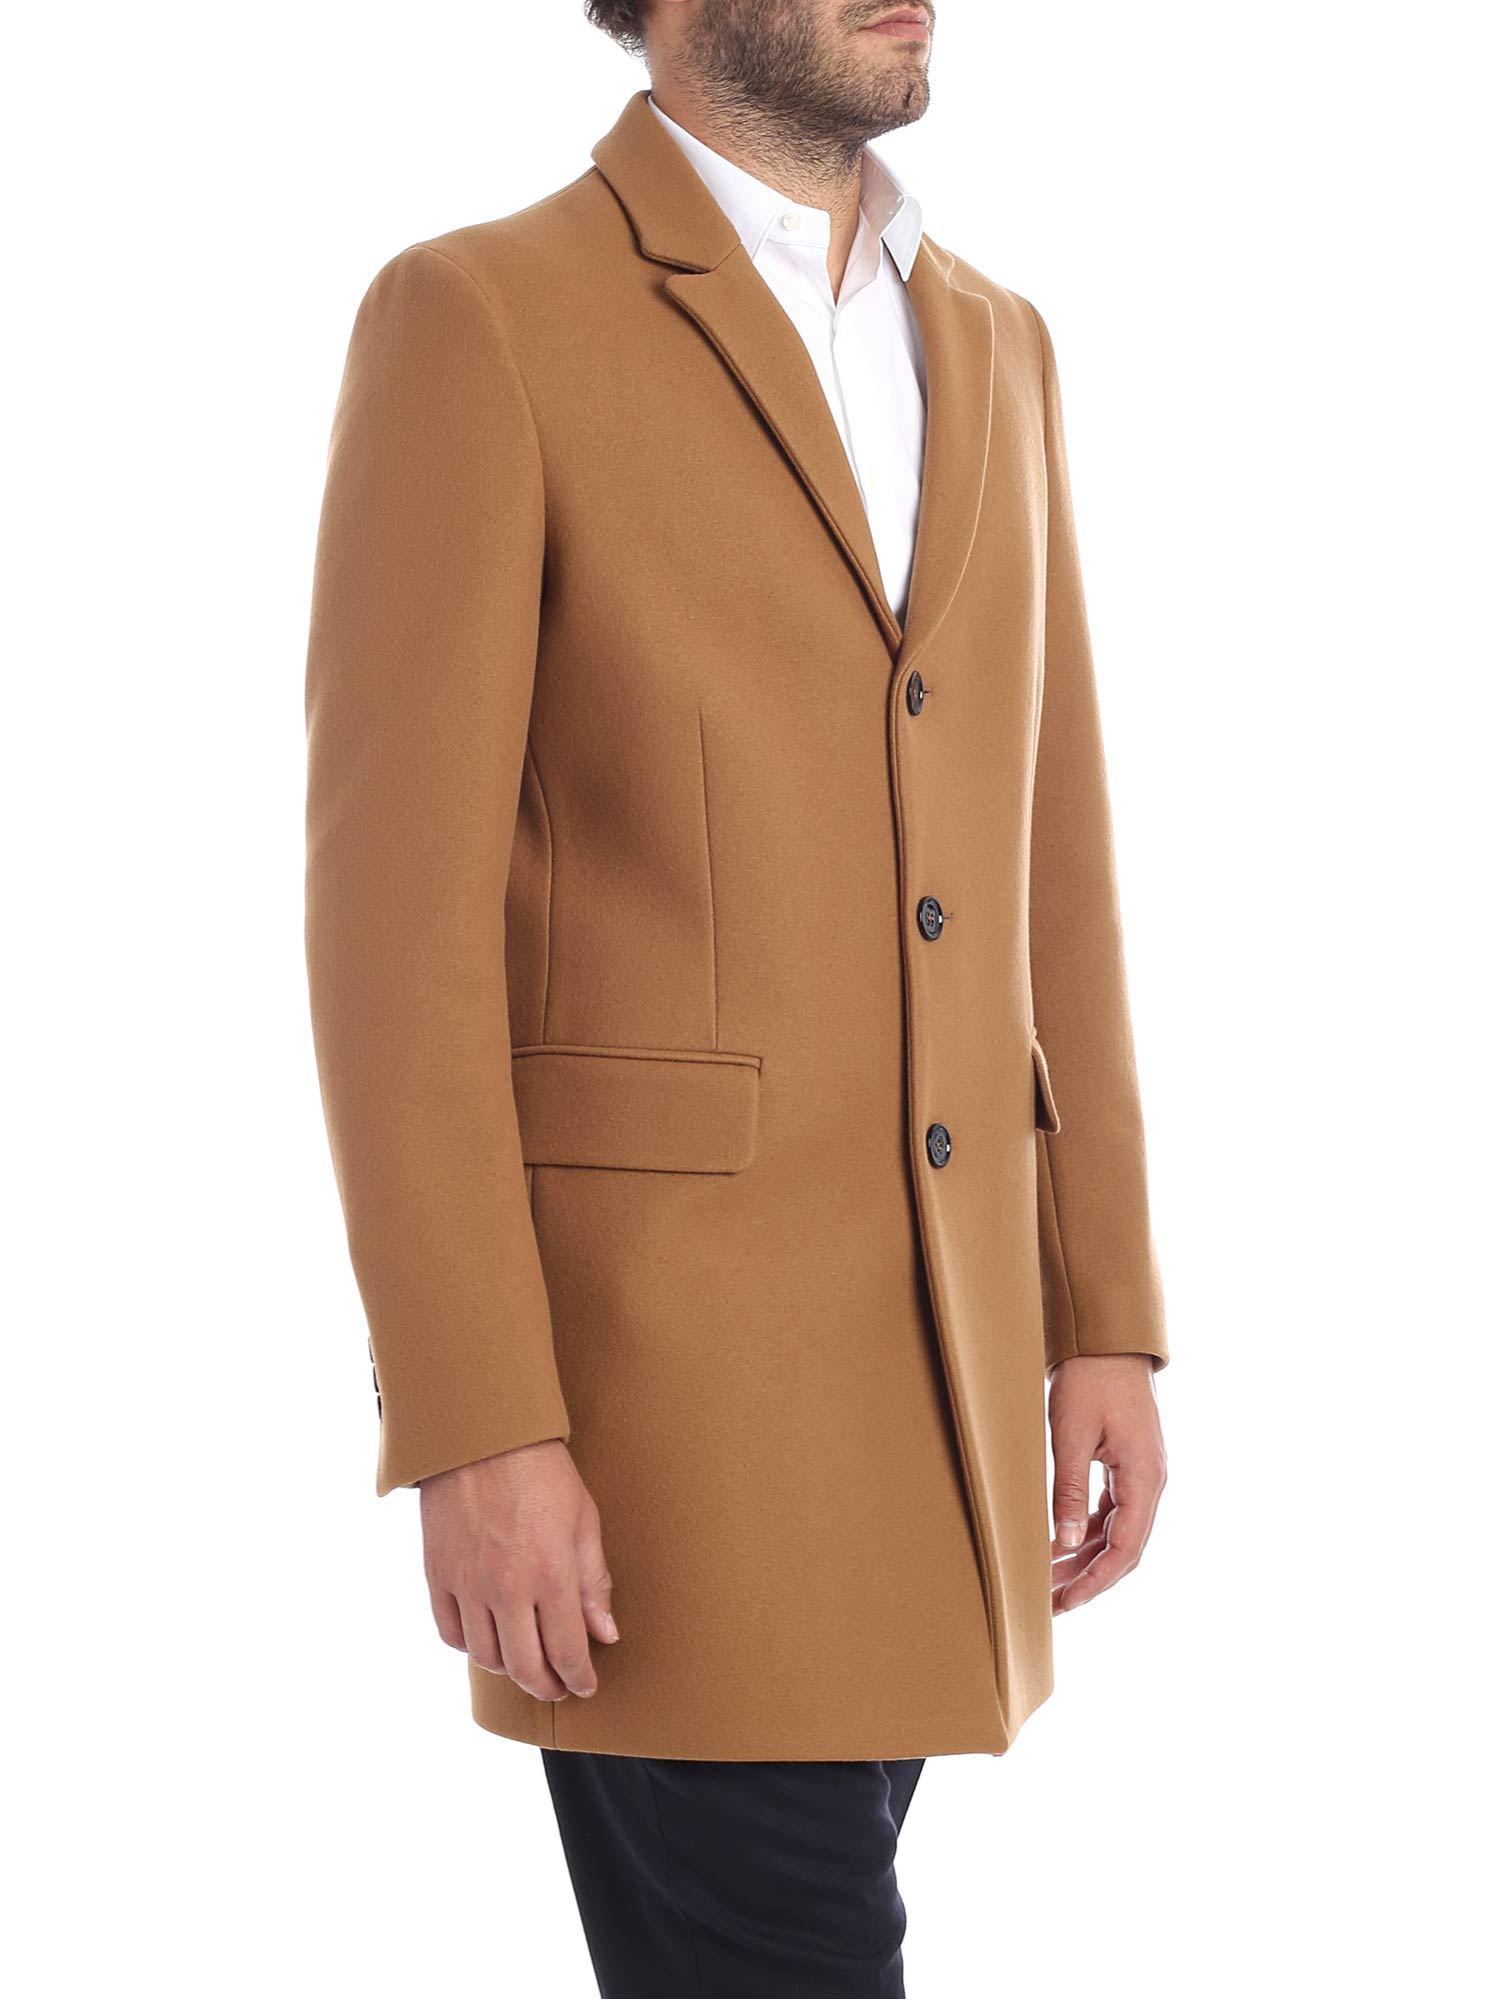 Lyst - Dondup Camel-colored Single-breasted Coat in Natural for Men